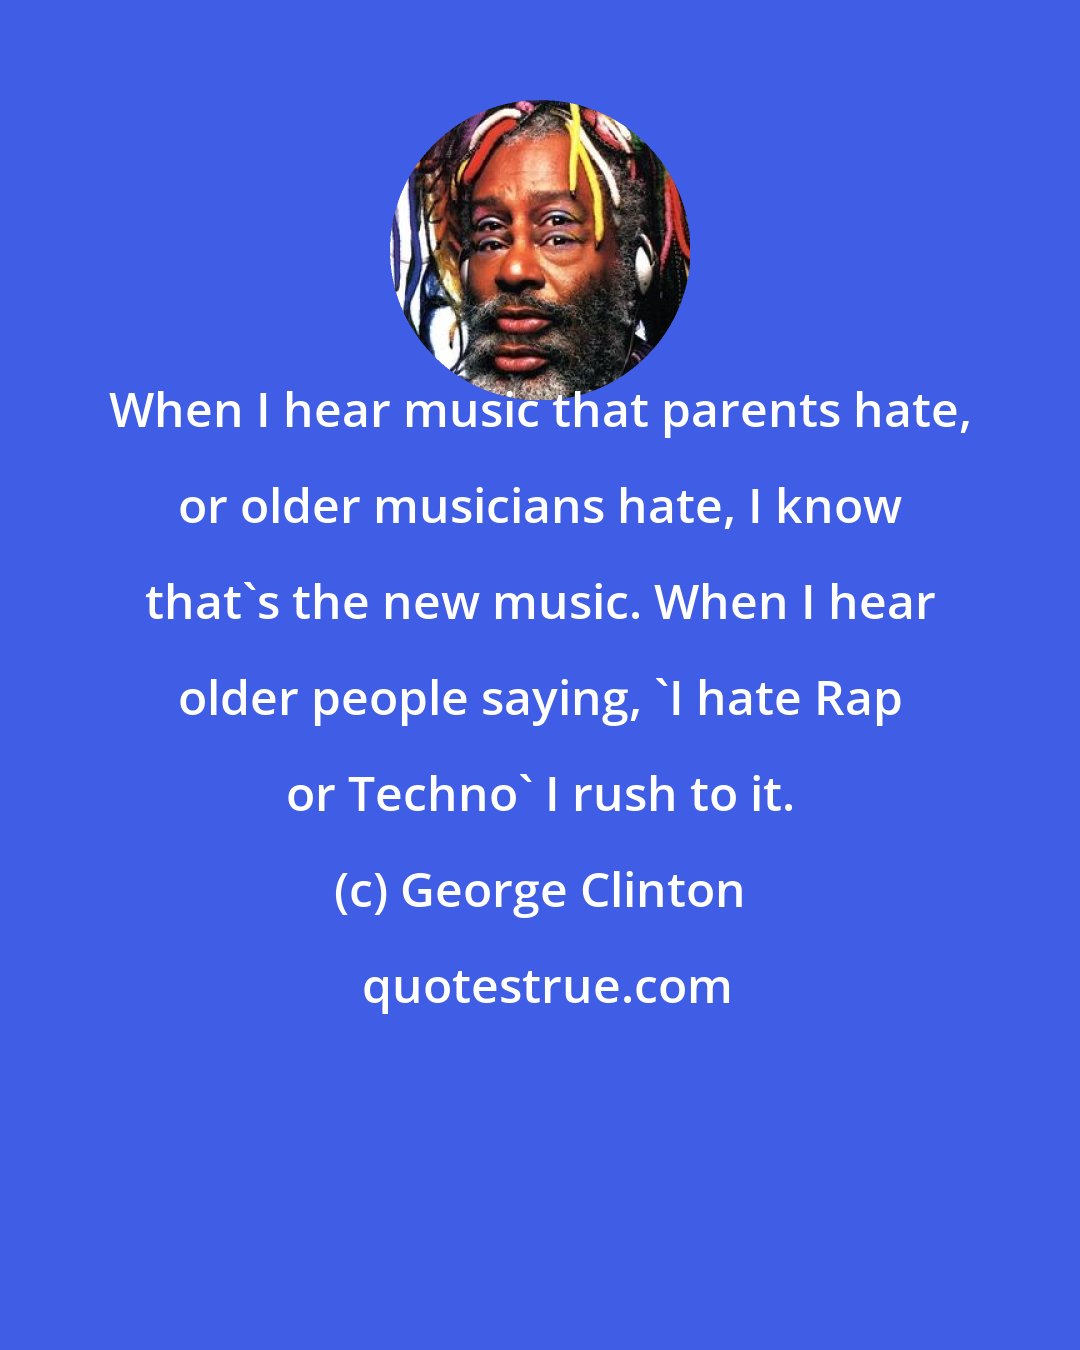 George Clinton: When I hear music that parents hate, or older musicians hate, I know that's the new music. When I hear older people saying, 'I hate Rap or Techno' I rush to it.